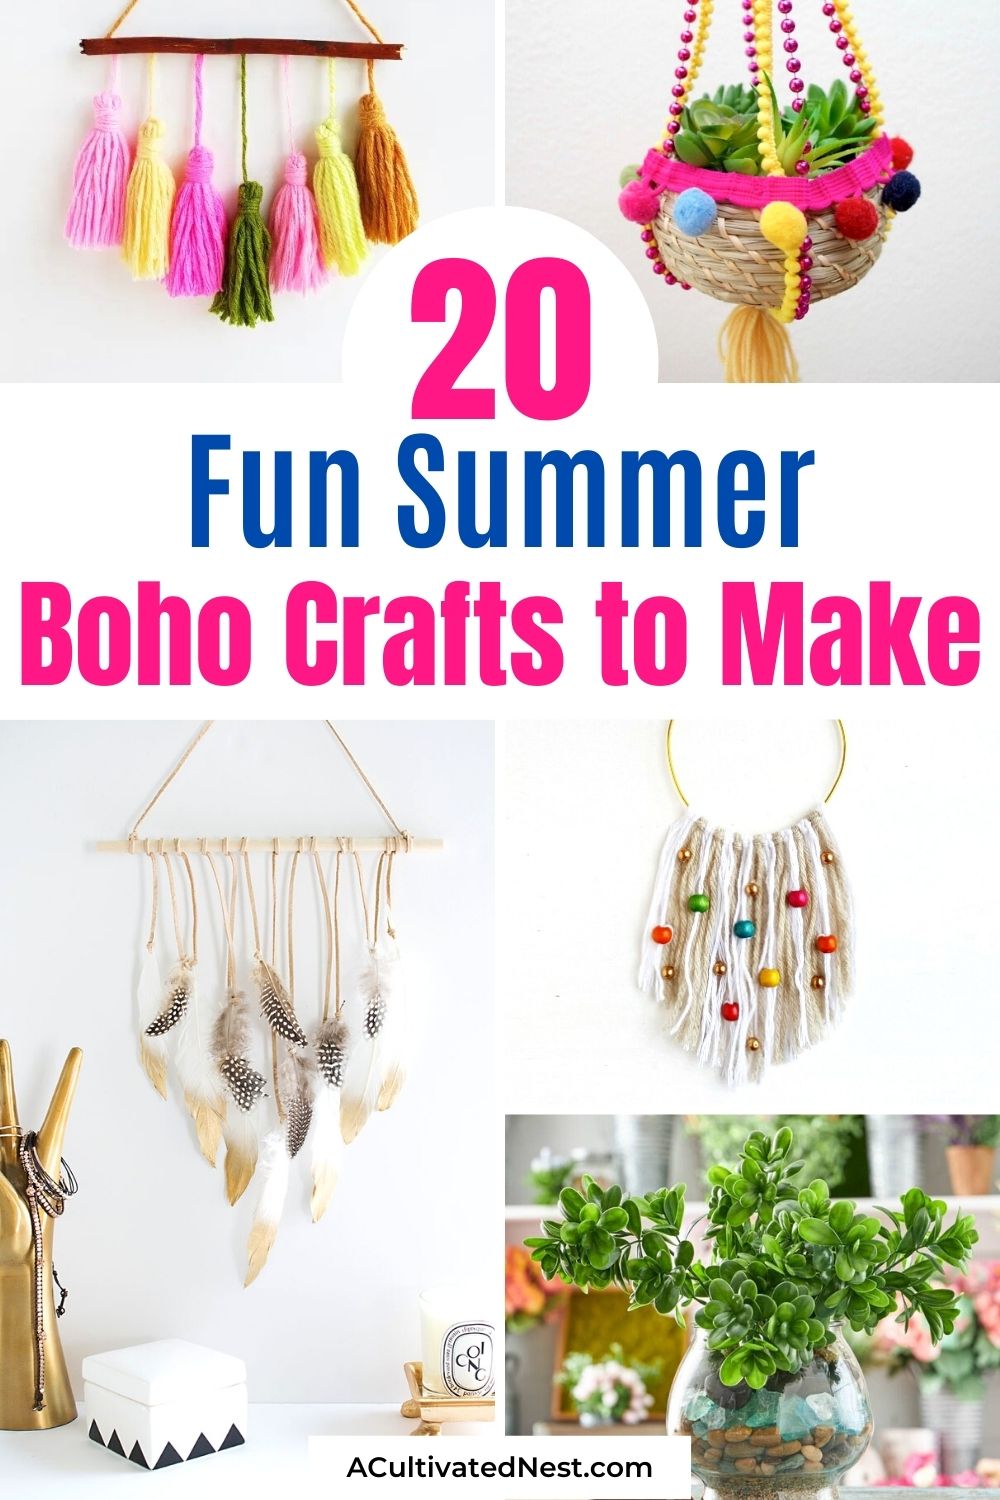 20 Fun Boho Crafts to Make This Summer- A fun and frugal way to add a playful boho vibe to your home this summer is with this collection of fun boho crafts! They're so easy to make! | #crafting #boho #DIY #bohoCrafts #ACultivatedNest